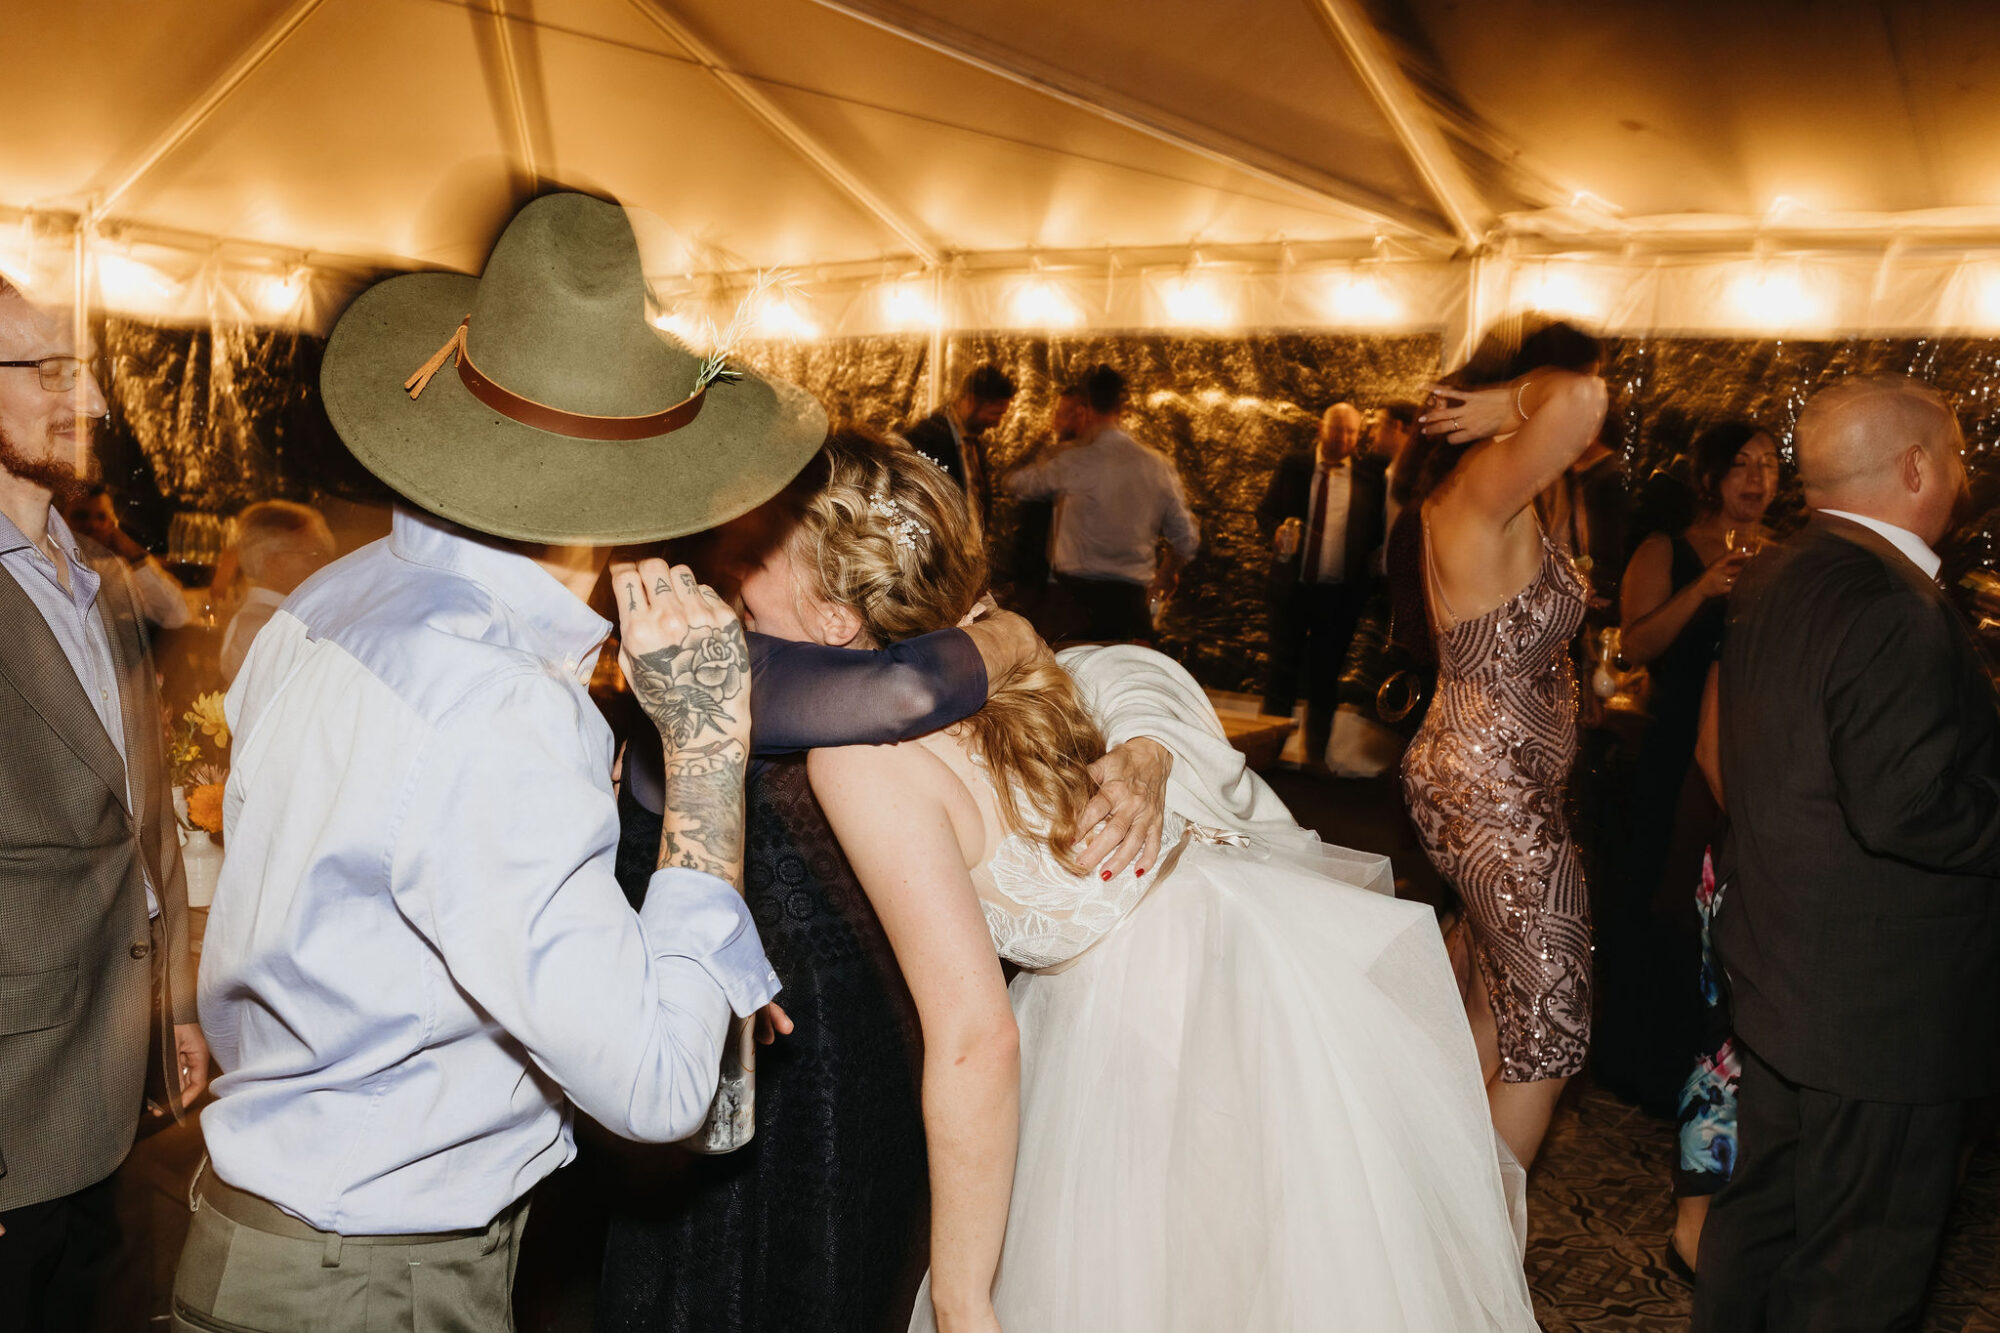 foxfire mountain house, catskill mountains, wedding, fall, fall florals, clear tent, reception, dancing, direct flash photos